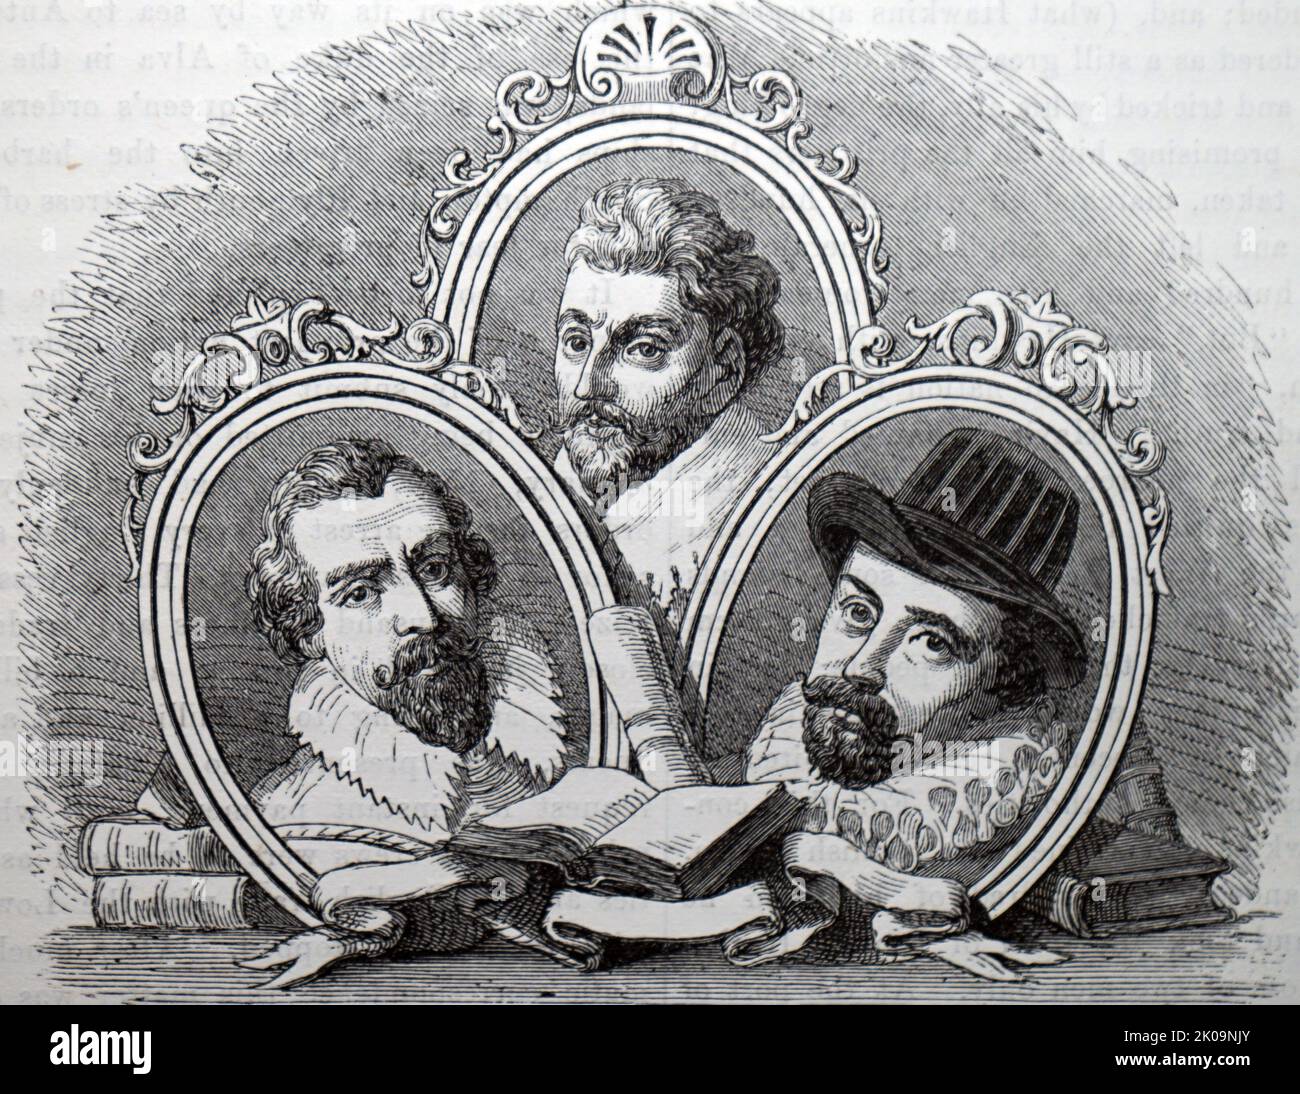 Illustration of Martin Frobisher, John Hawkins and Francis Drake. Sir Martin Frobisher (c. 1535 - 22 November 1594) was an English seaman and privateer who made three voyages to the New World looking for the North-west Passage. Sir John Hawkins (1532 - 12 November 1595) was a pioneering English naval commander and administrator. He was also a privateer and an early promoter of English involvement in the Atlantic slave trade. Sir Francis Drake (c.1540 - 28 January 1596) was an English explorer, sea captain, privateer, slave trader, naval officer, and politician. Stock Photo